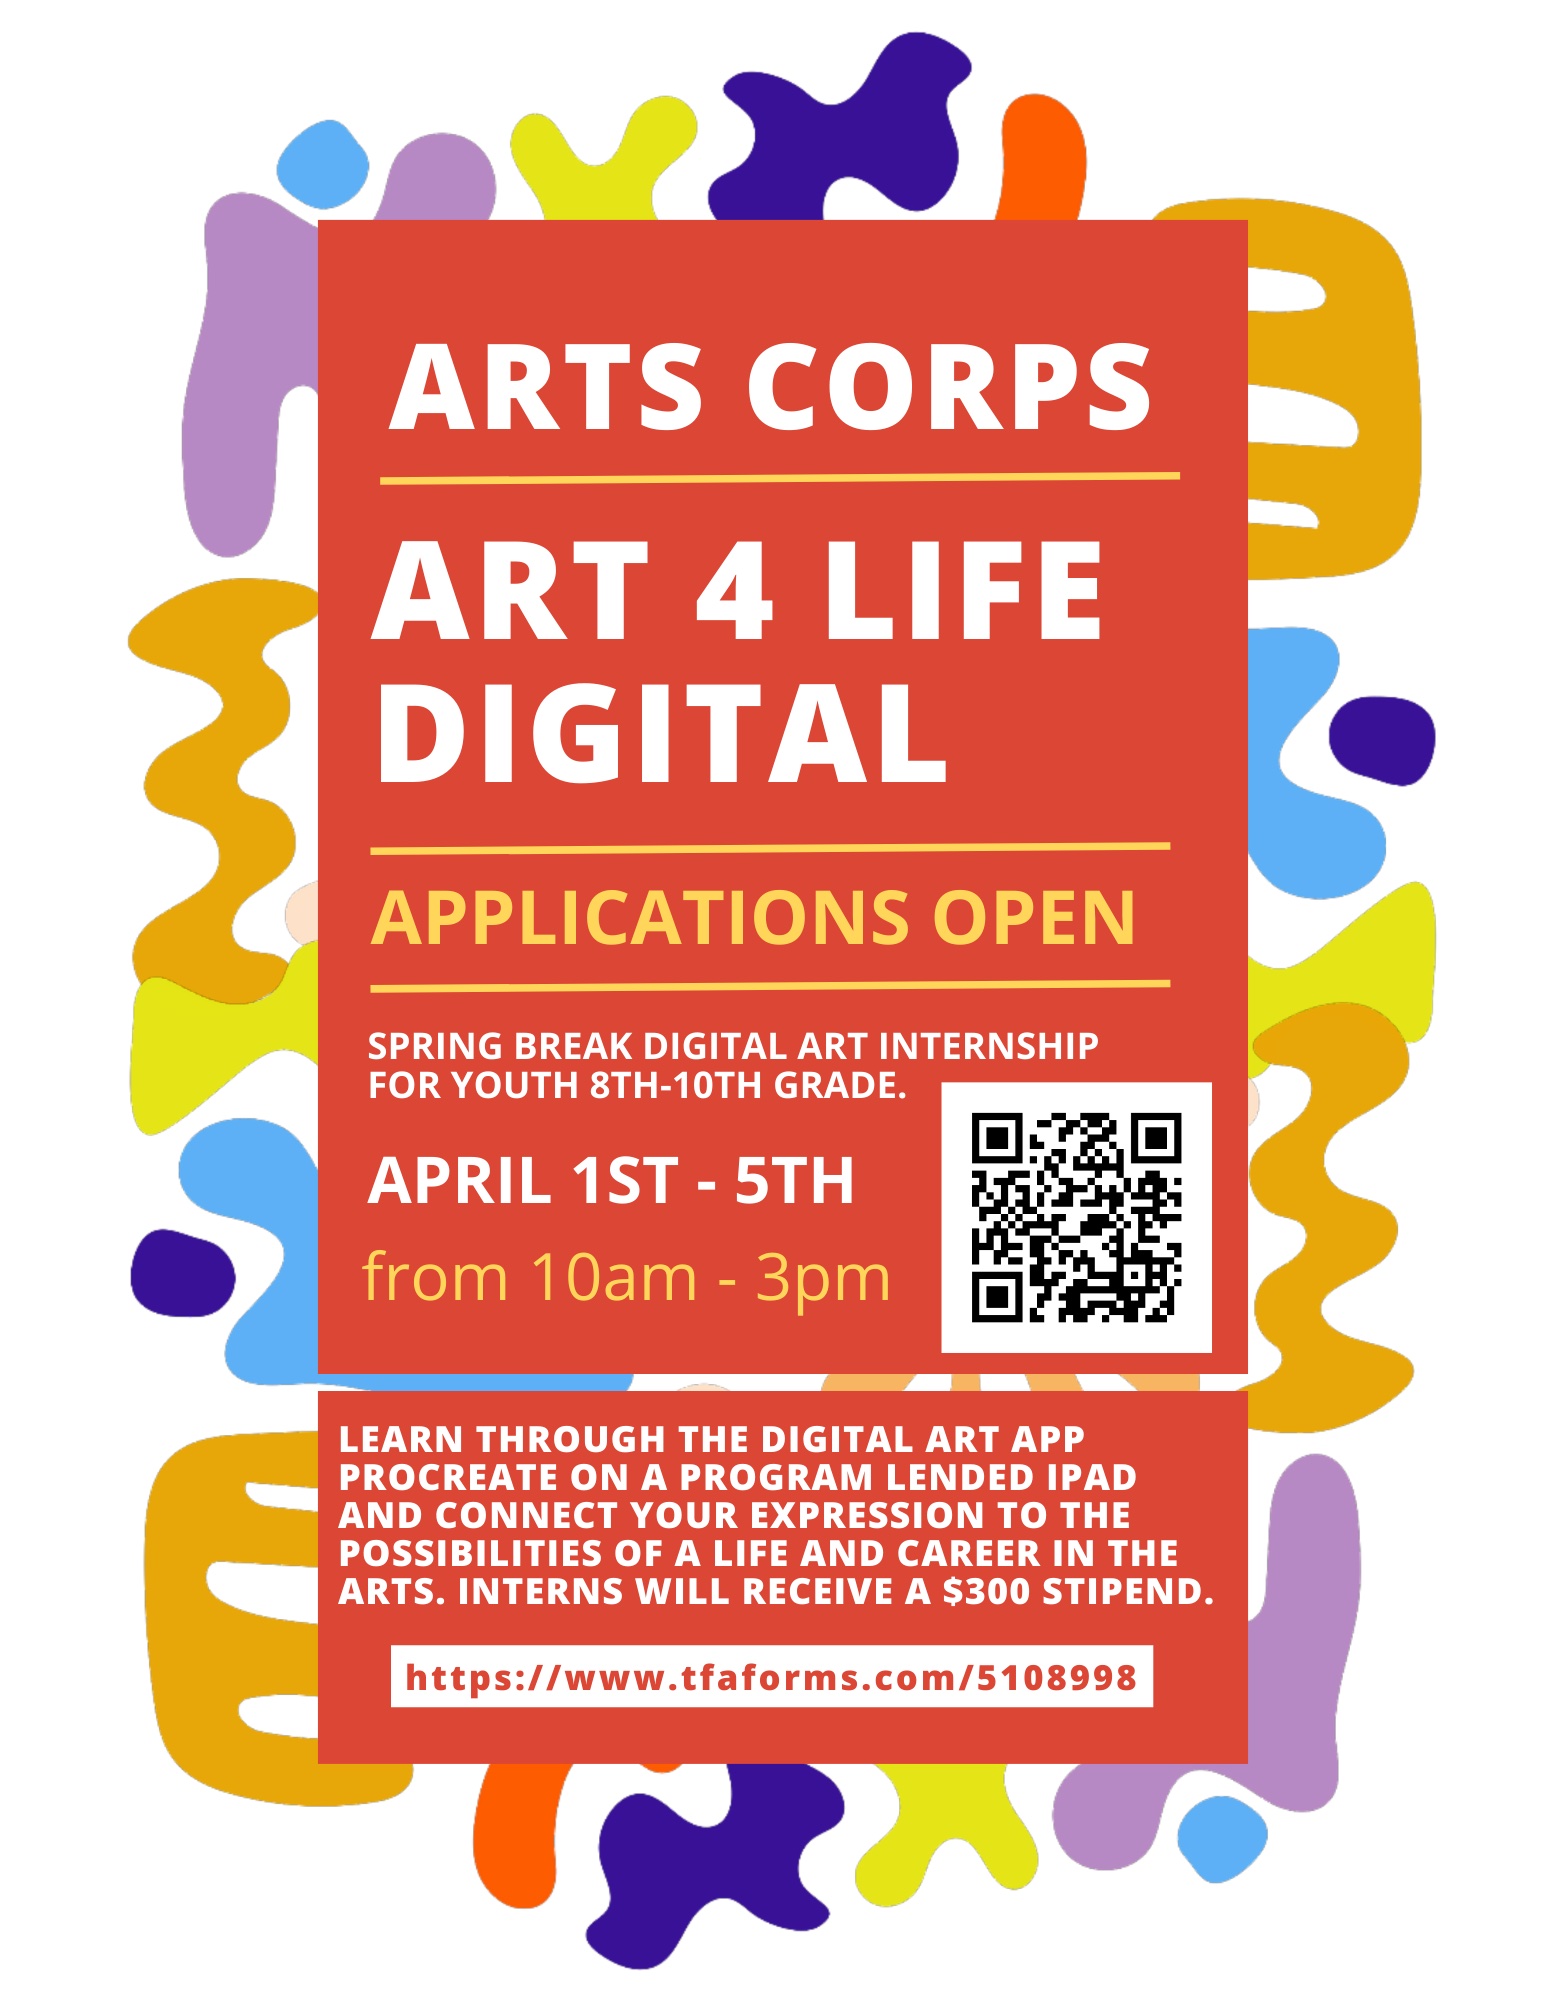 Arts Corps Art 4 Life Digital flyer with dates and times, QR code for application, and brief description